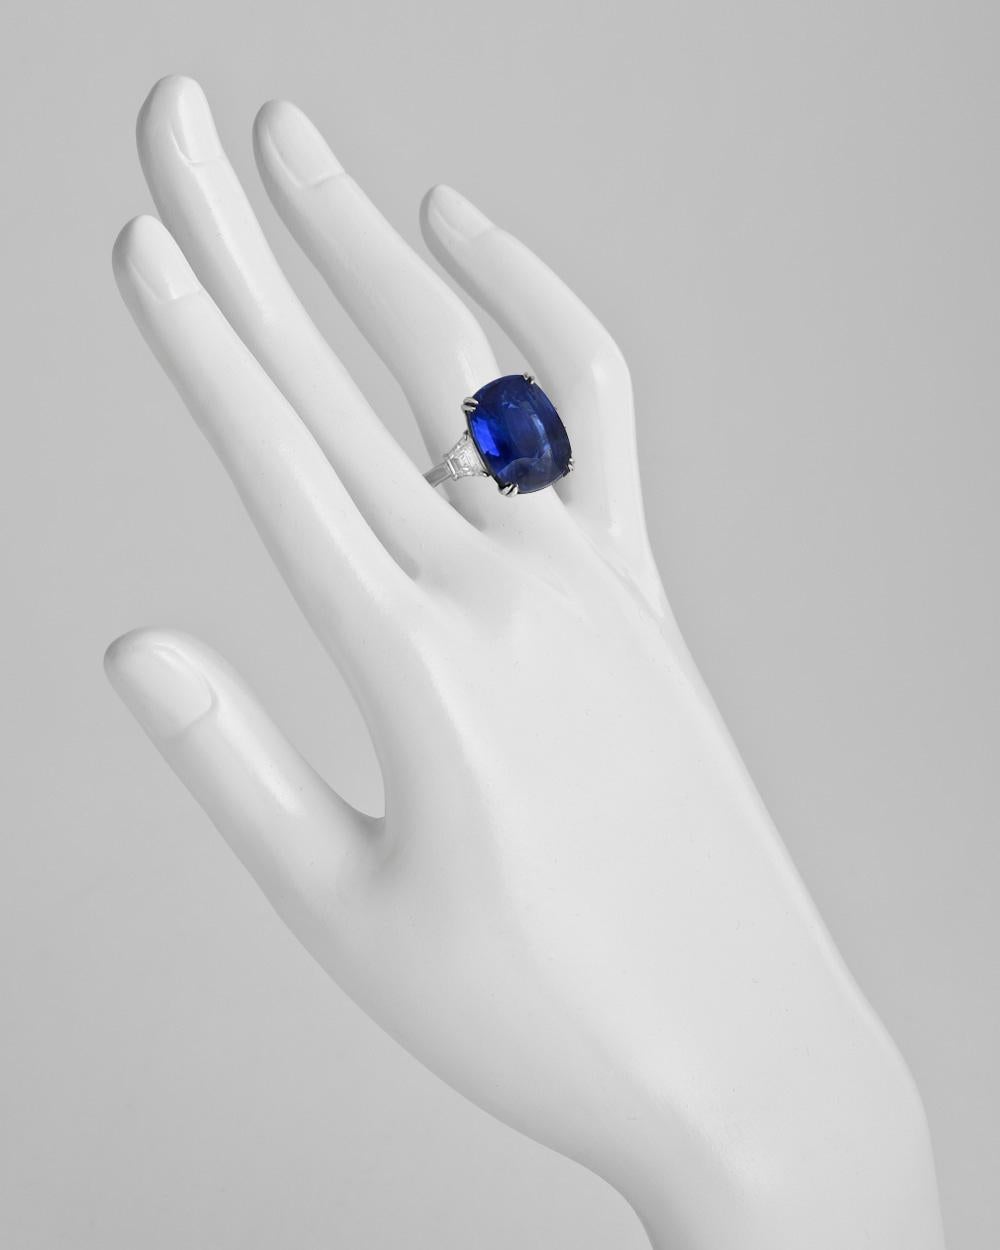 Ceylon sapphire and diamond ring, centering a natural no-heat cushion-shaped sapphire weighing 16.04 carats, flanked by a trapeze-cut diamond at either shoulder, the pair of diamonds weighing approximately 1.06 total carats, mounted in platinum.